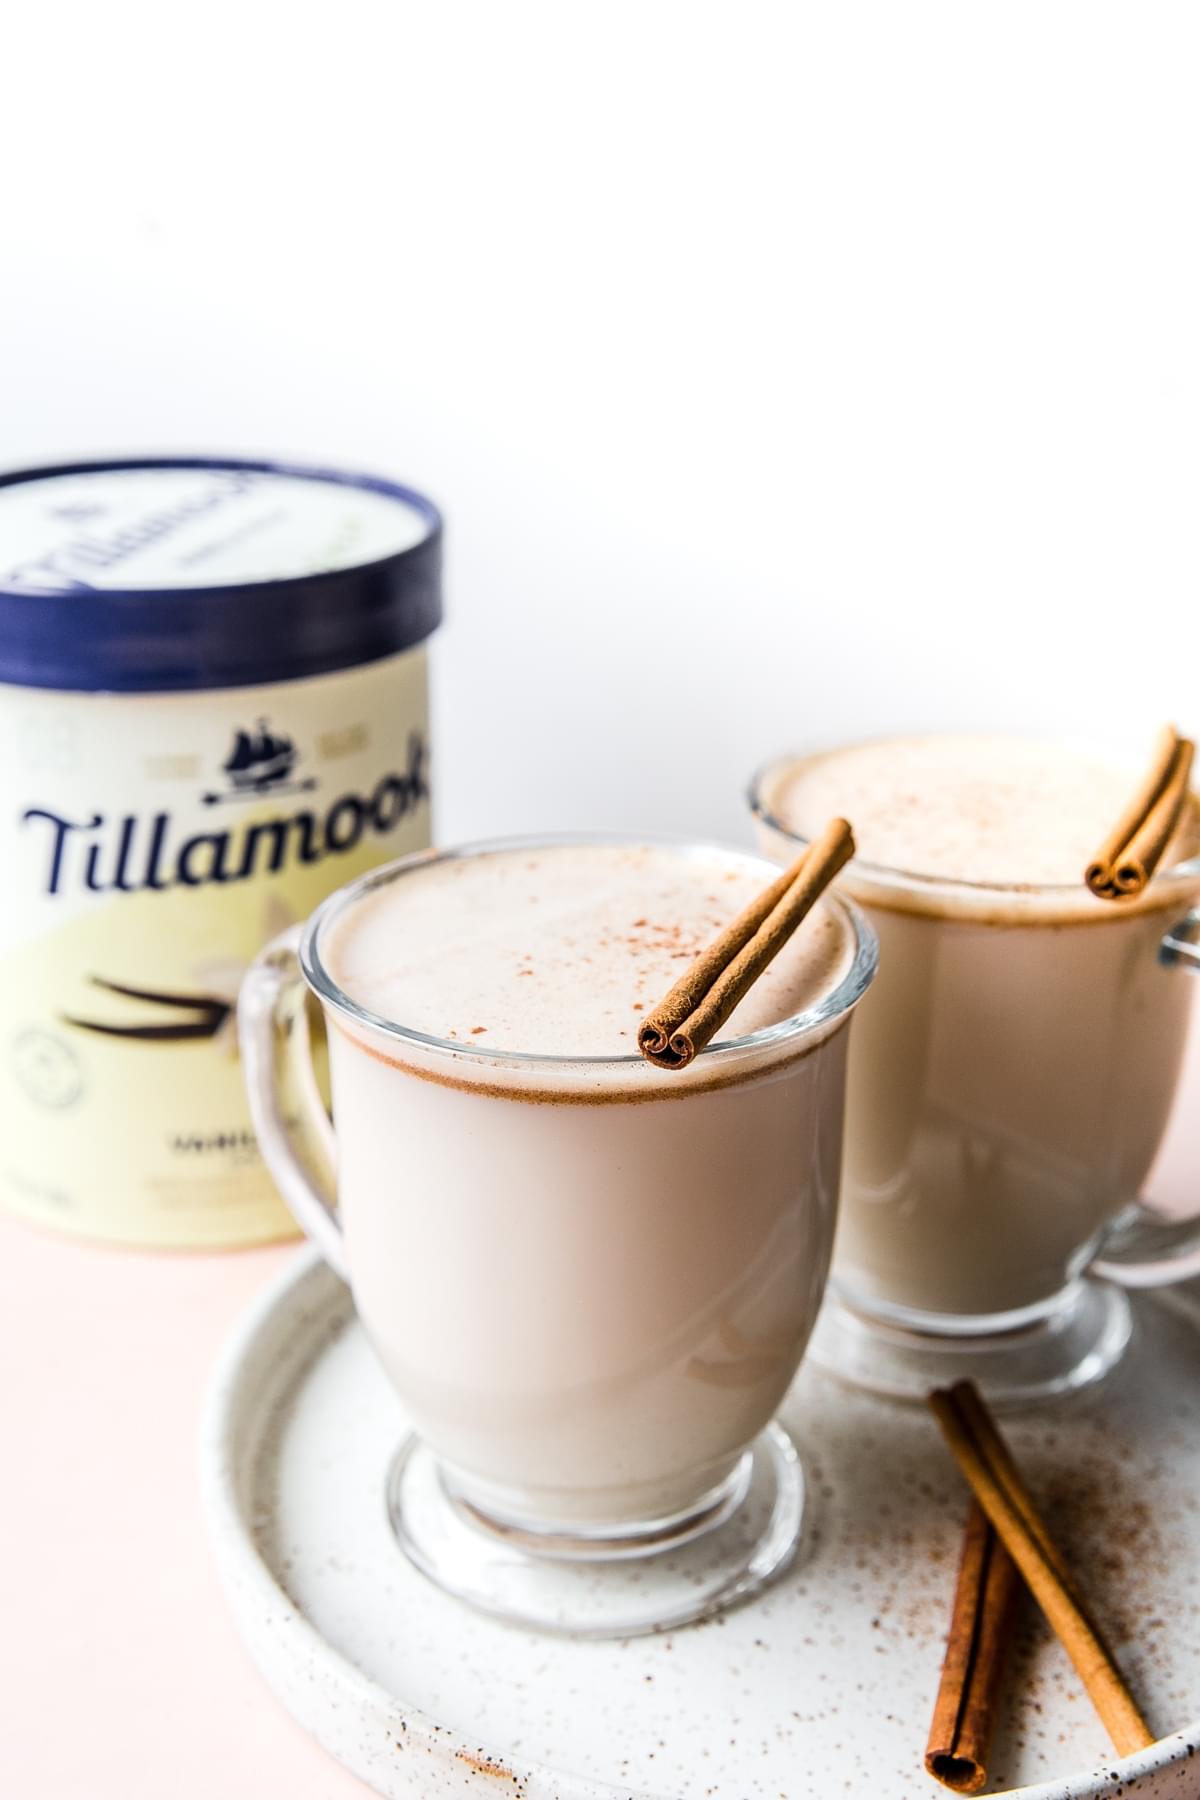 Tillamook ice cream with 2 mugs of homemade hot buttered rum